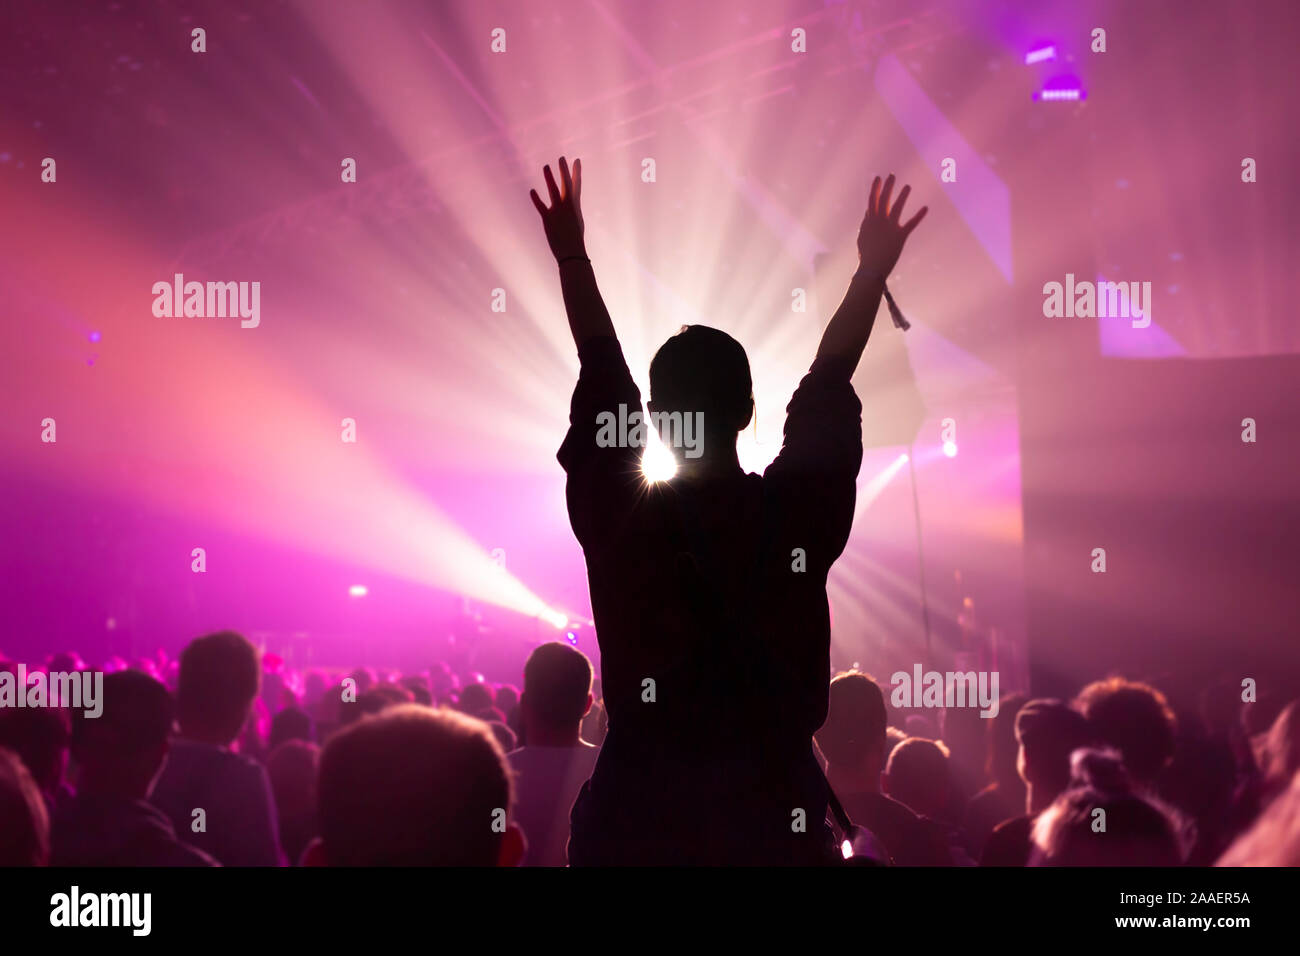 Silhouette of a Woman Dancing Whilst Sat On Someones Shoulders at a Music Concert with Bright Magenta Lighting Stock Photo